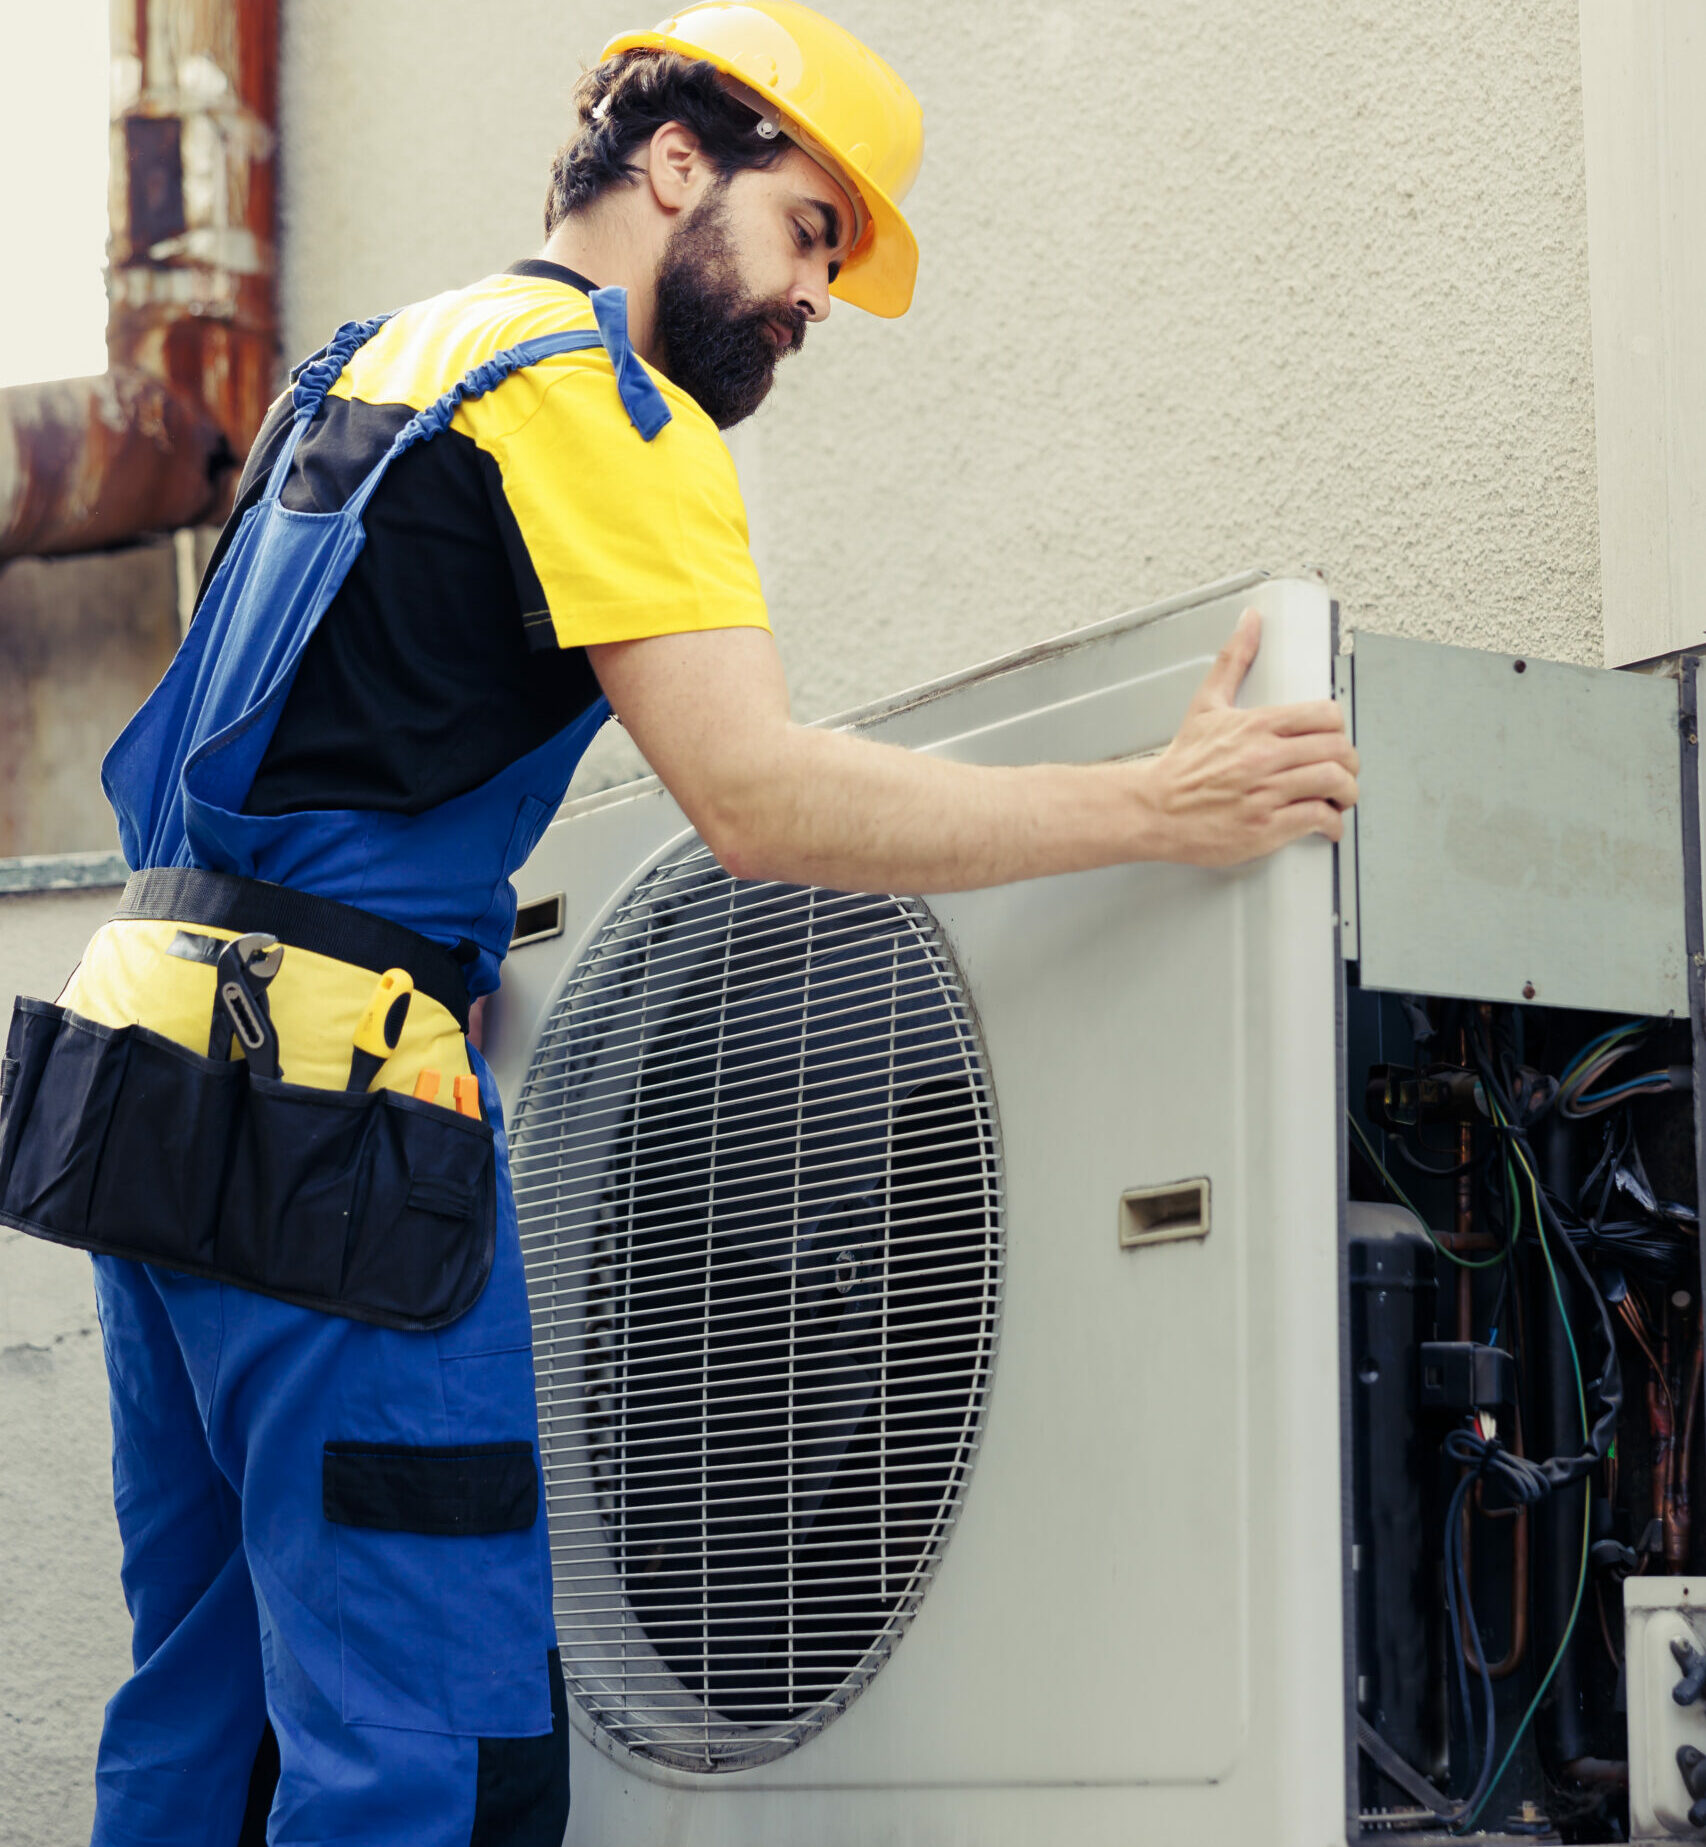 certified technician contracted fix broken air conditioner dismantling condenser front coil panel check faulty internal components electrician opening hvac system check improper wiring scaled e1715329977326